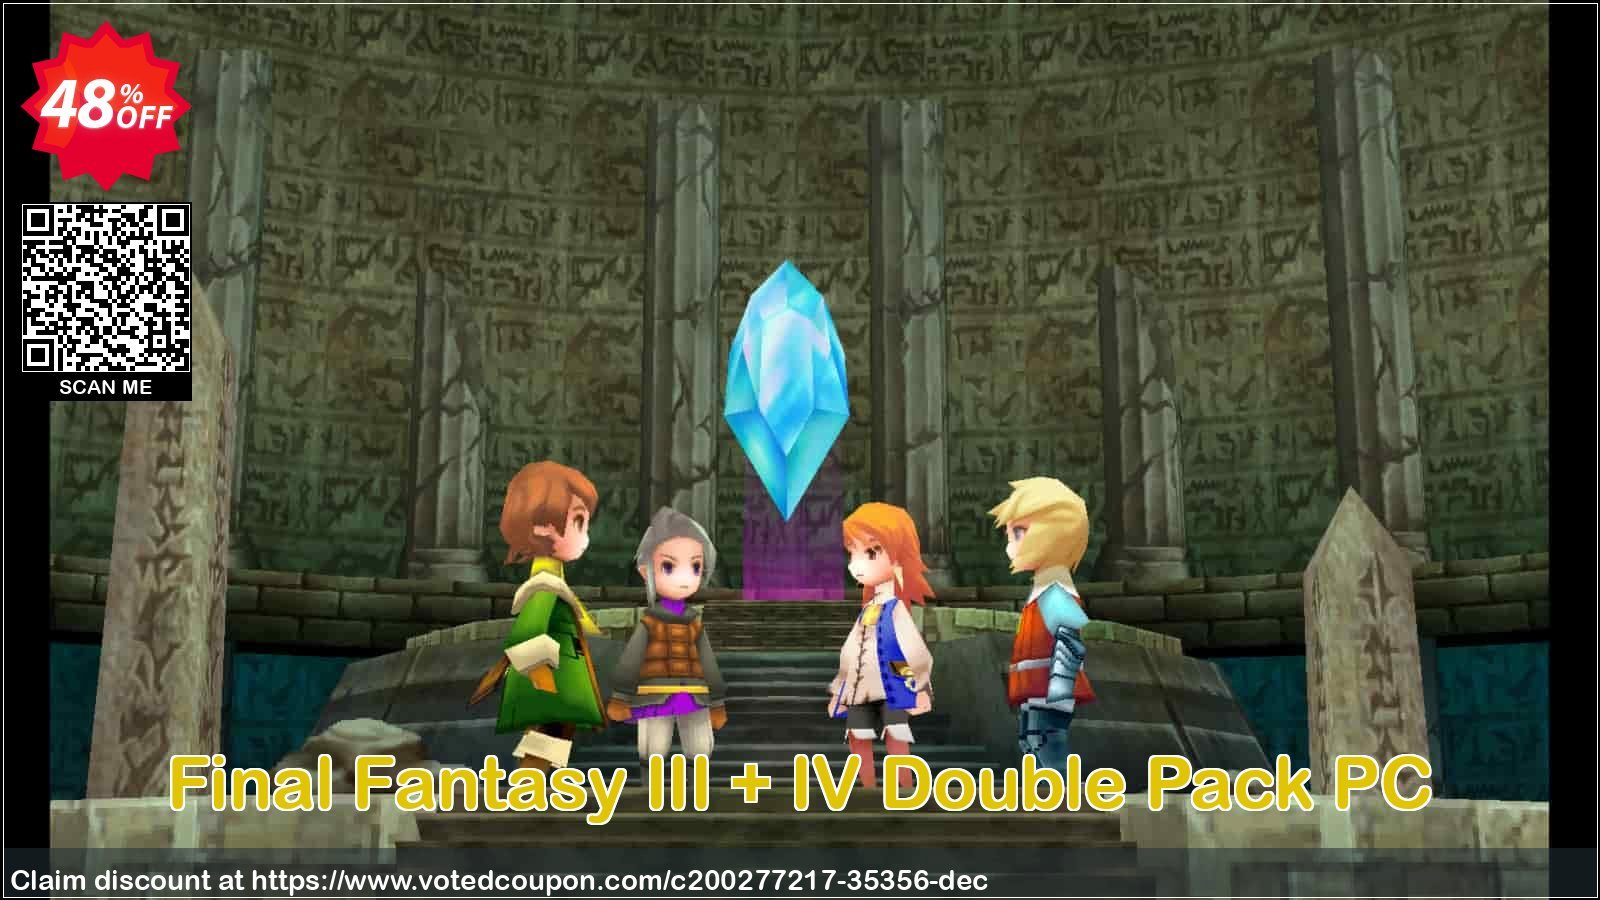 Final Fantasy III + IV Double Pack PC Coupon Code May 2024, 48% OFF - VotedCoupon